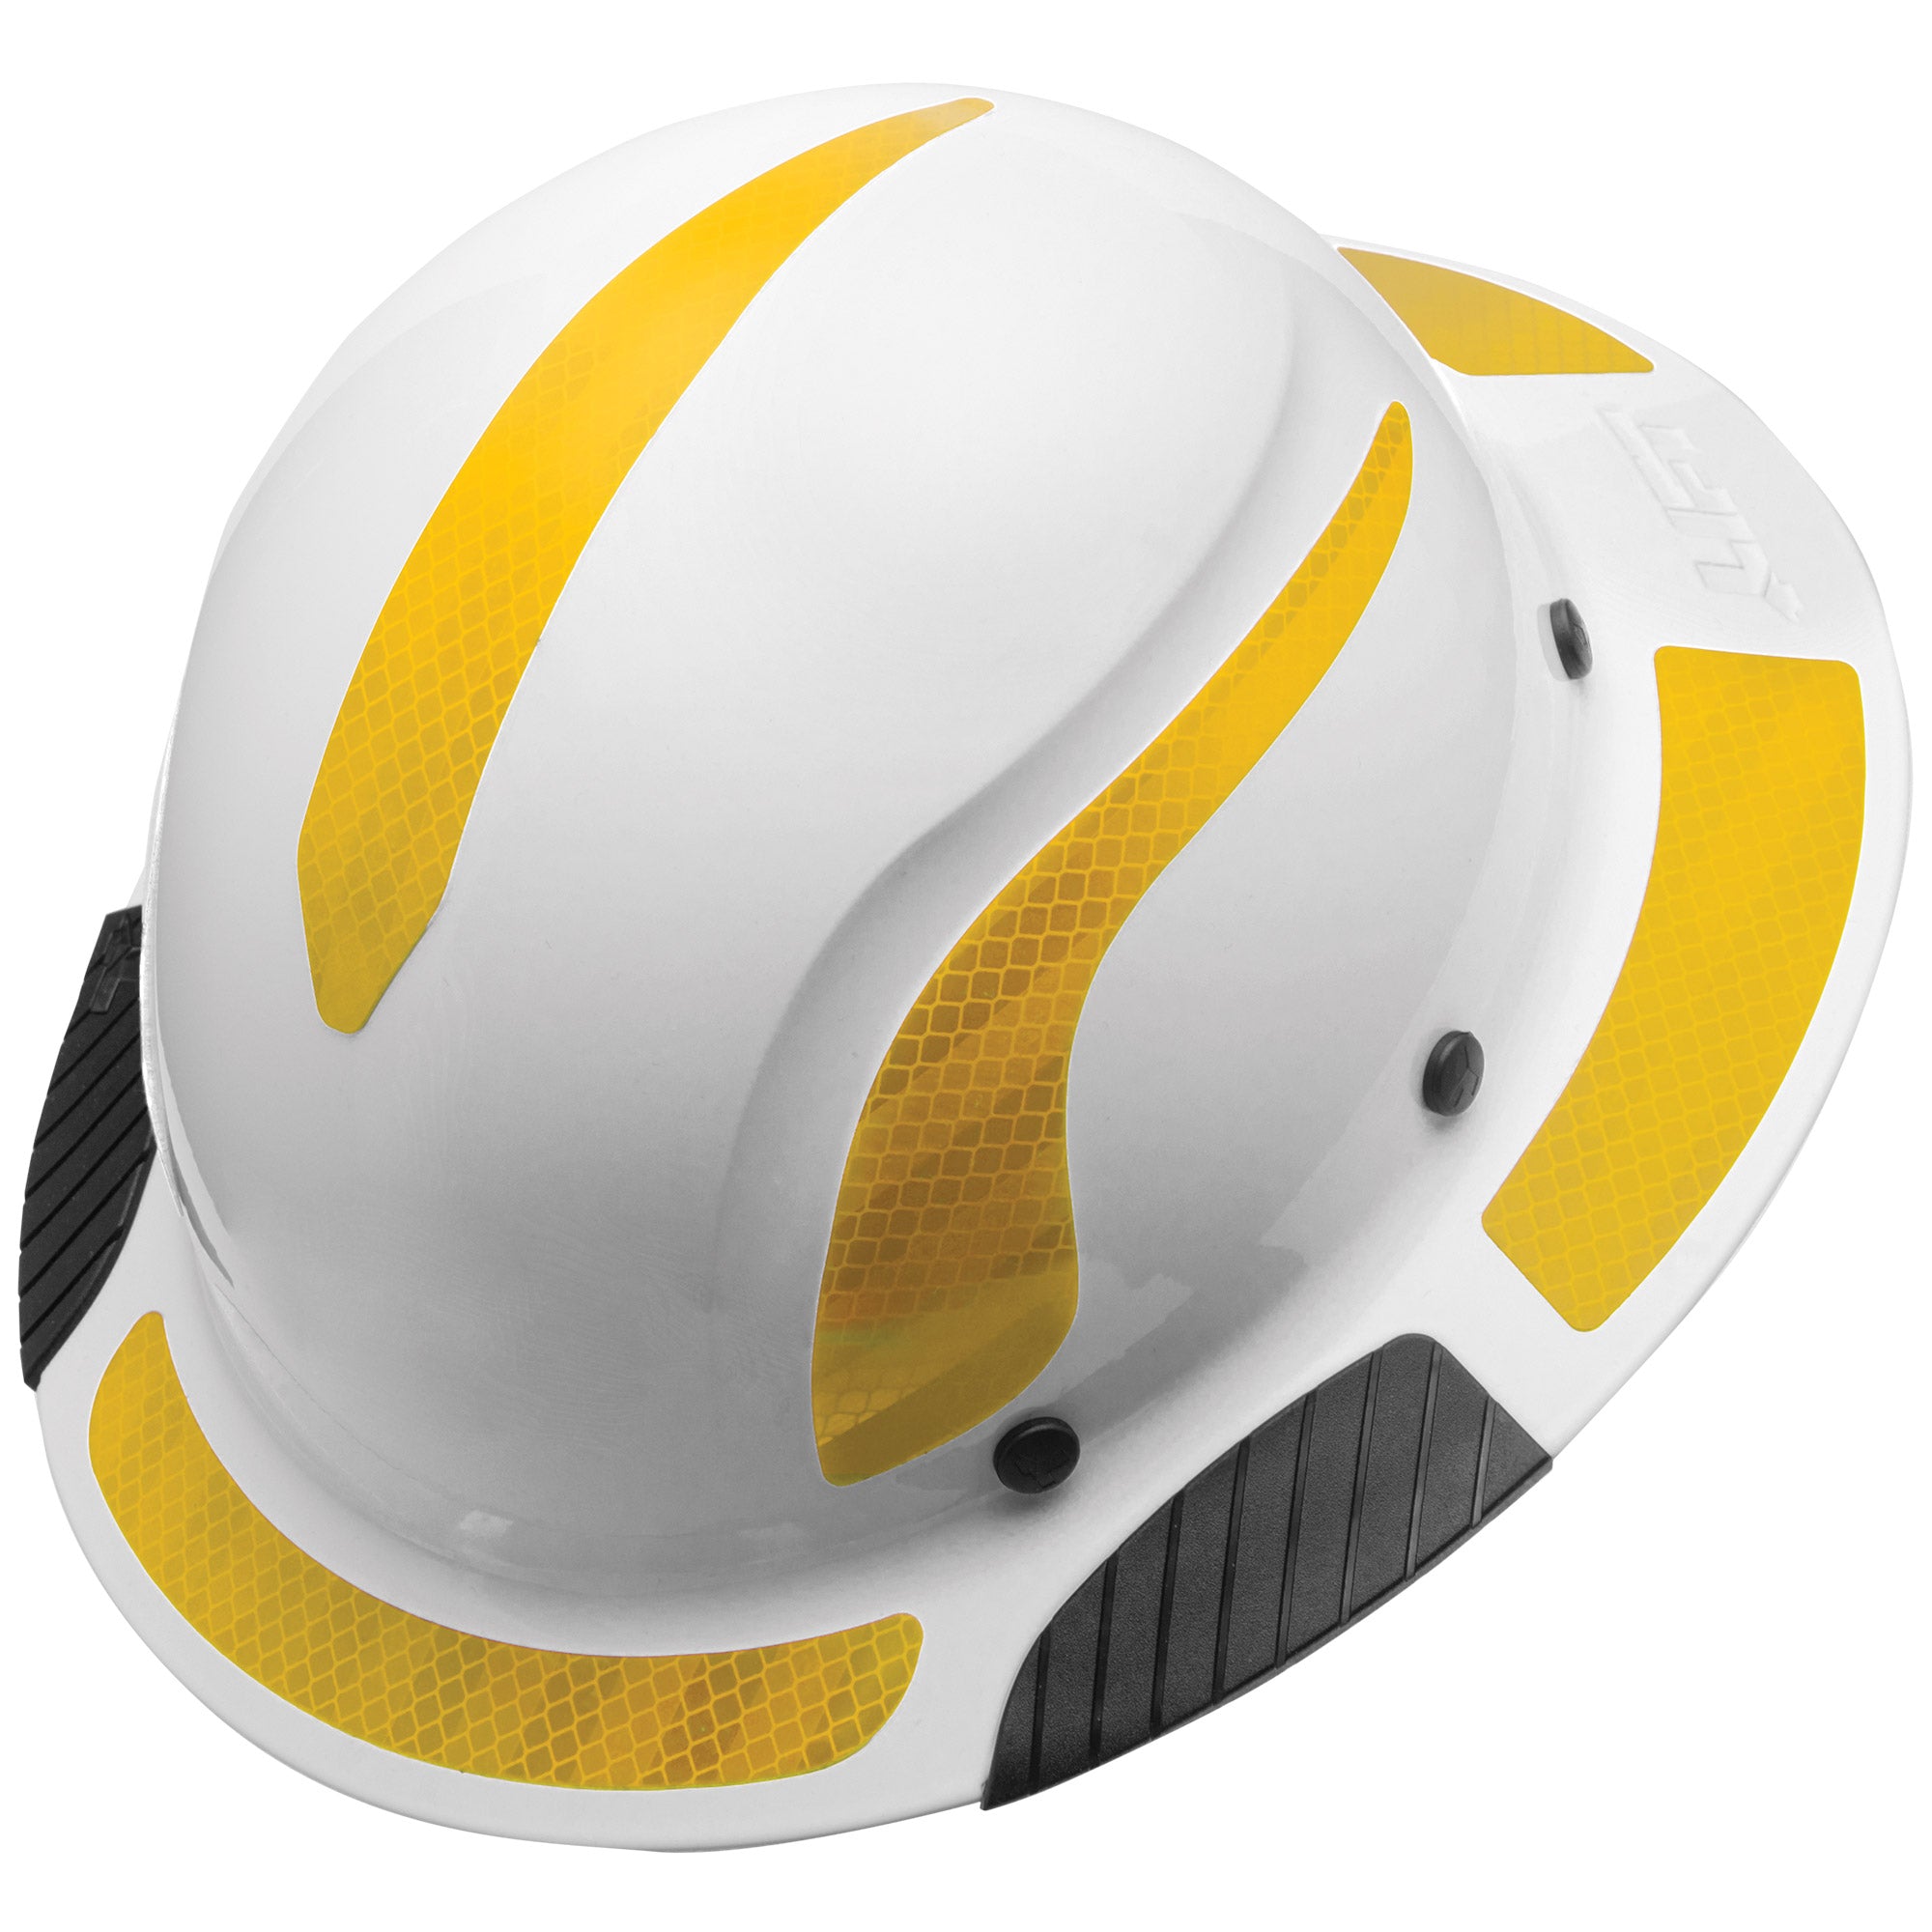 Lift Safety HDRD-20YL Dax Reflective Decals Yellow